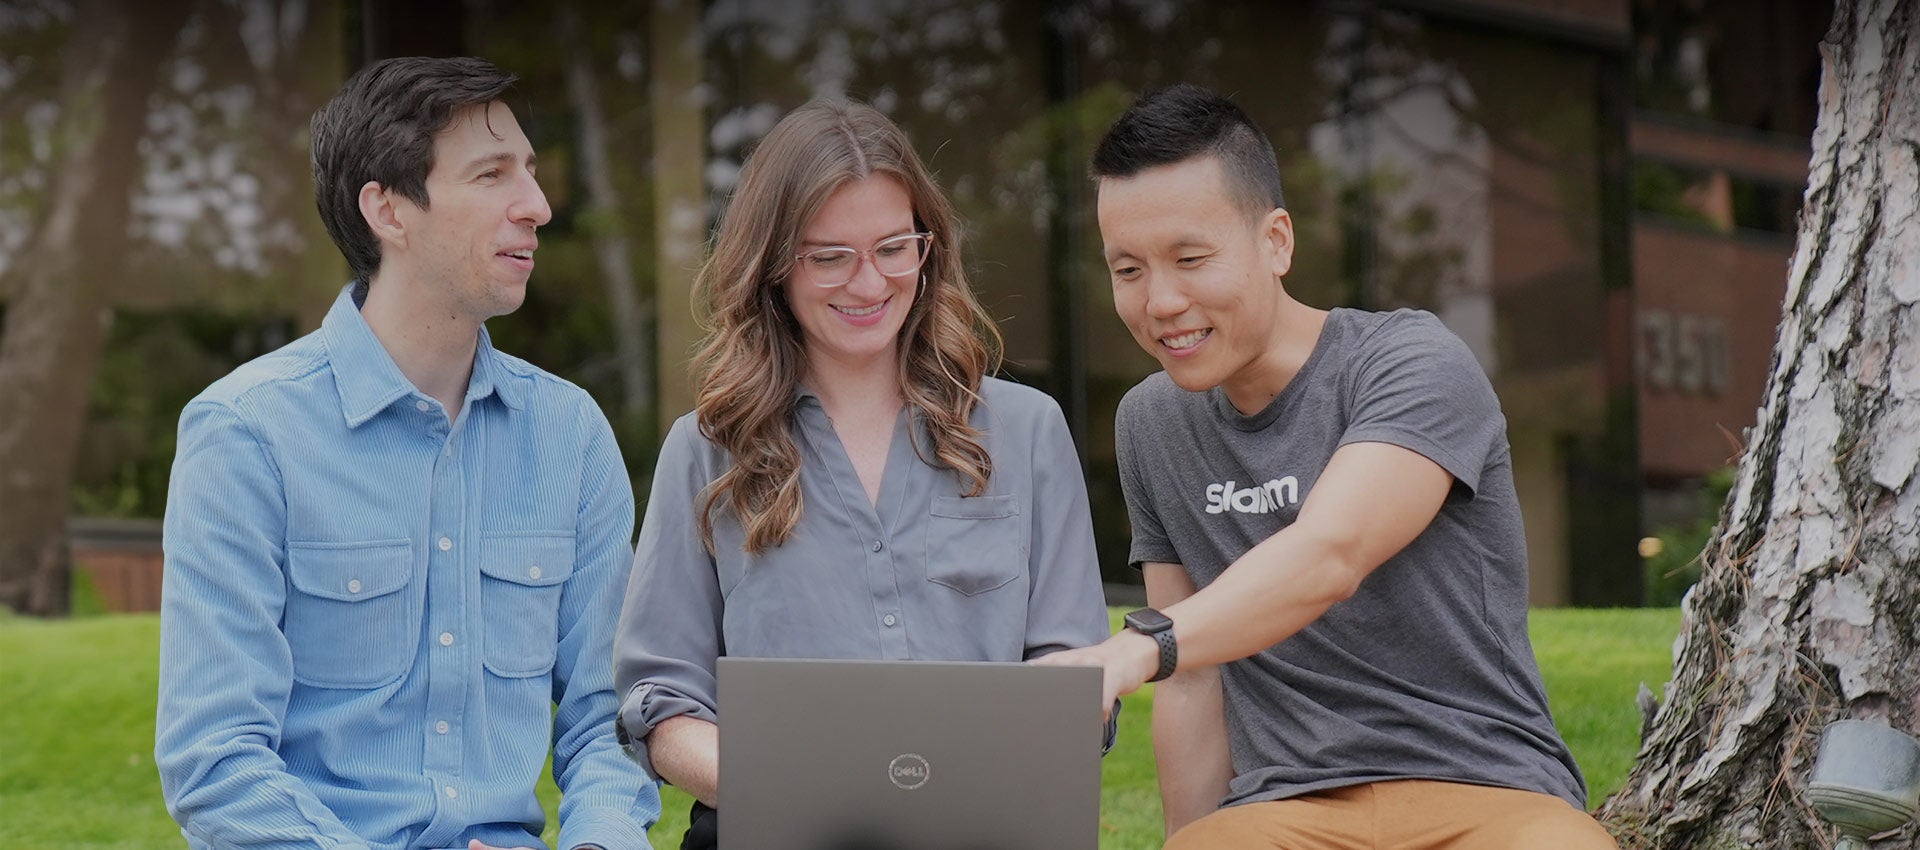 Three Slalom employees work together to build a solution for a client.